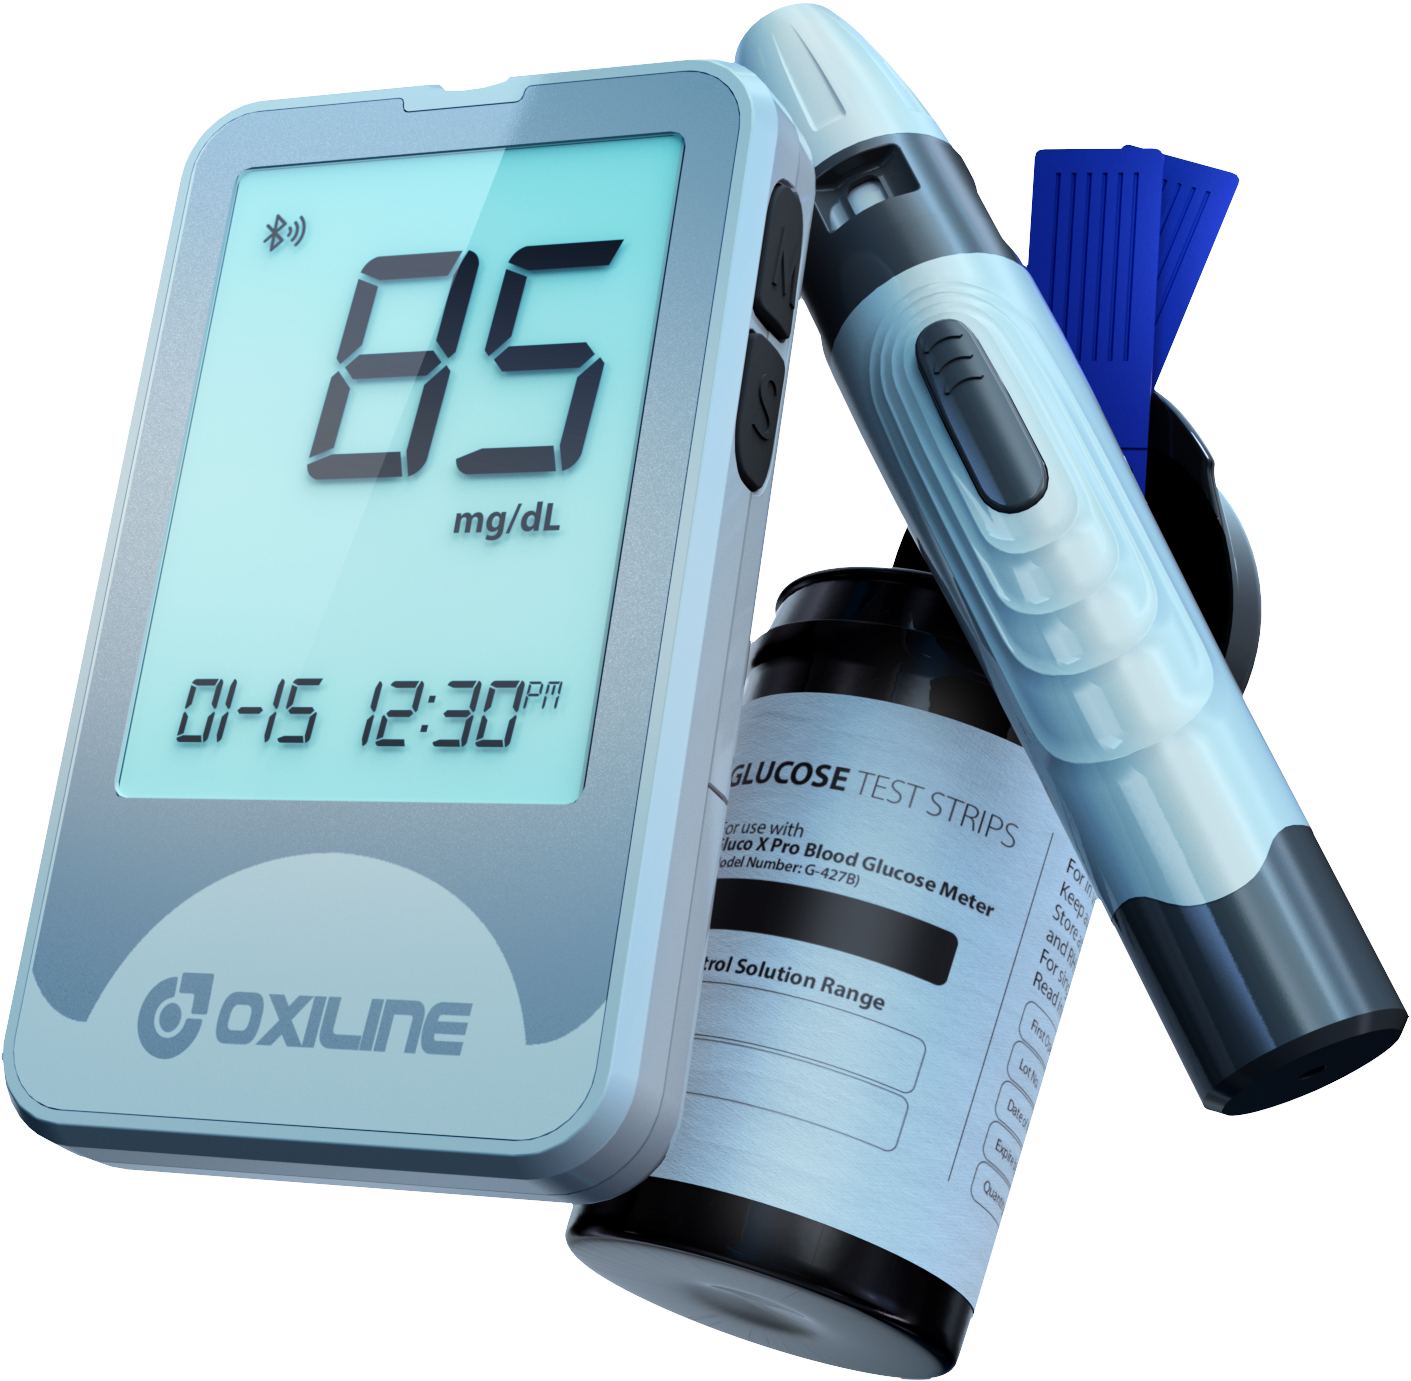 A floating glucometer kit with a blue light shining on it, highlighting the modern and sleek design of the device and accessories used for measuring blood sugar levels.